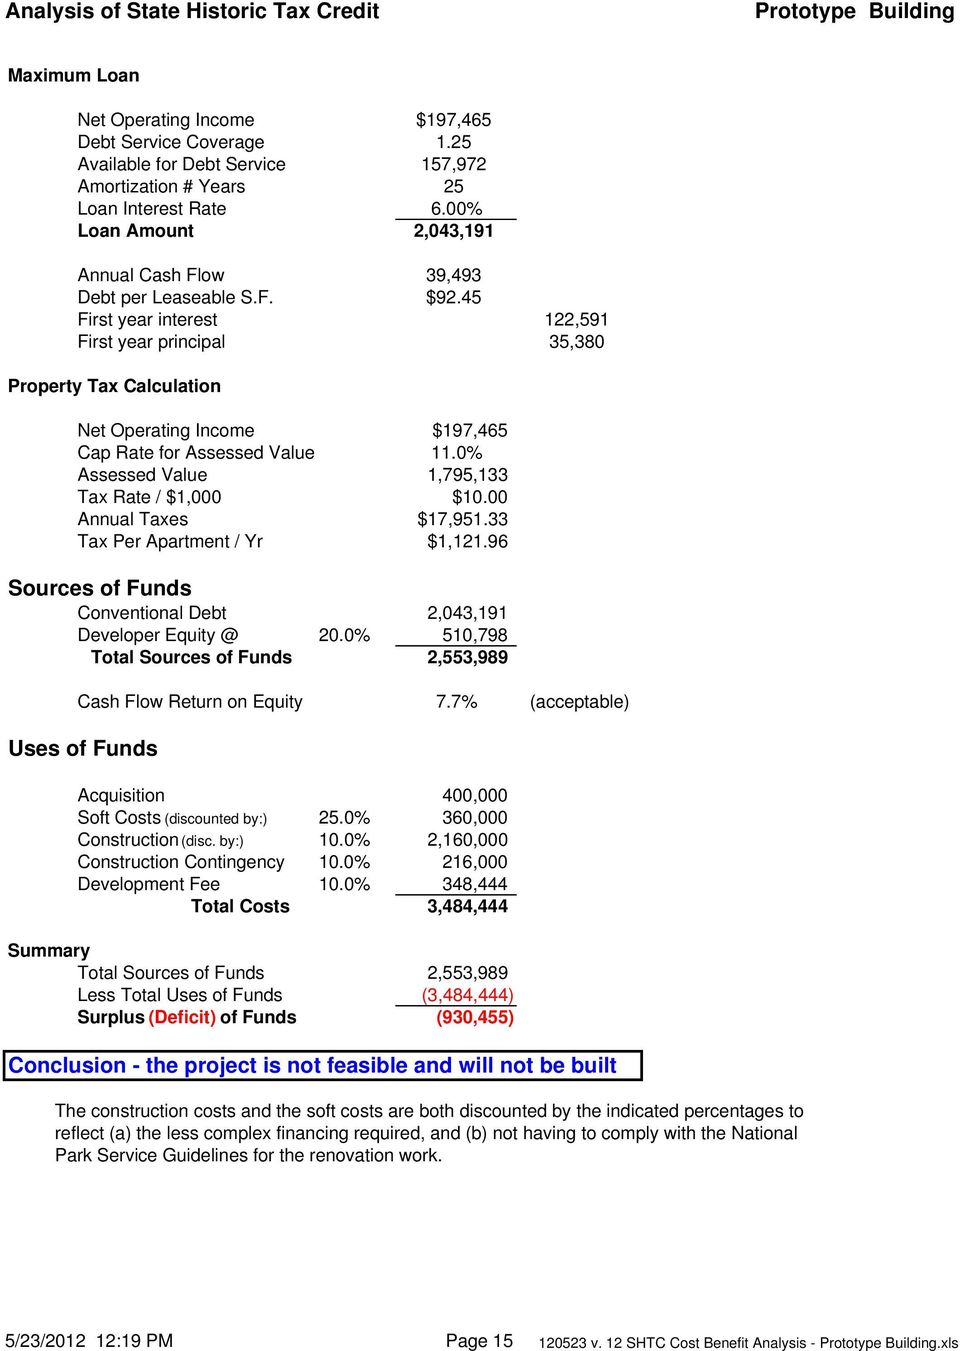 45 First year interest 122,591 First year principal 35,380 Property Tax Calculation Net Operating Income $197,465 Cap Rate for Assessed Value 11.0% Assessed Value 1,795,133 Tax Rate / $1,000 $10.